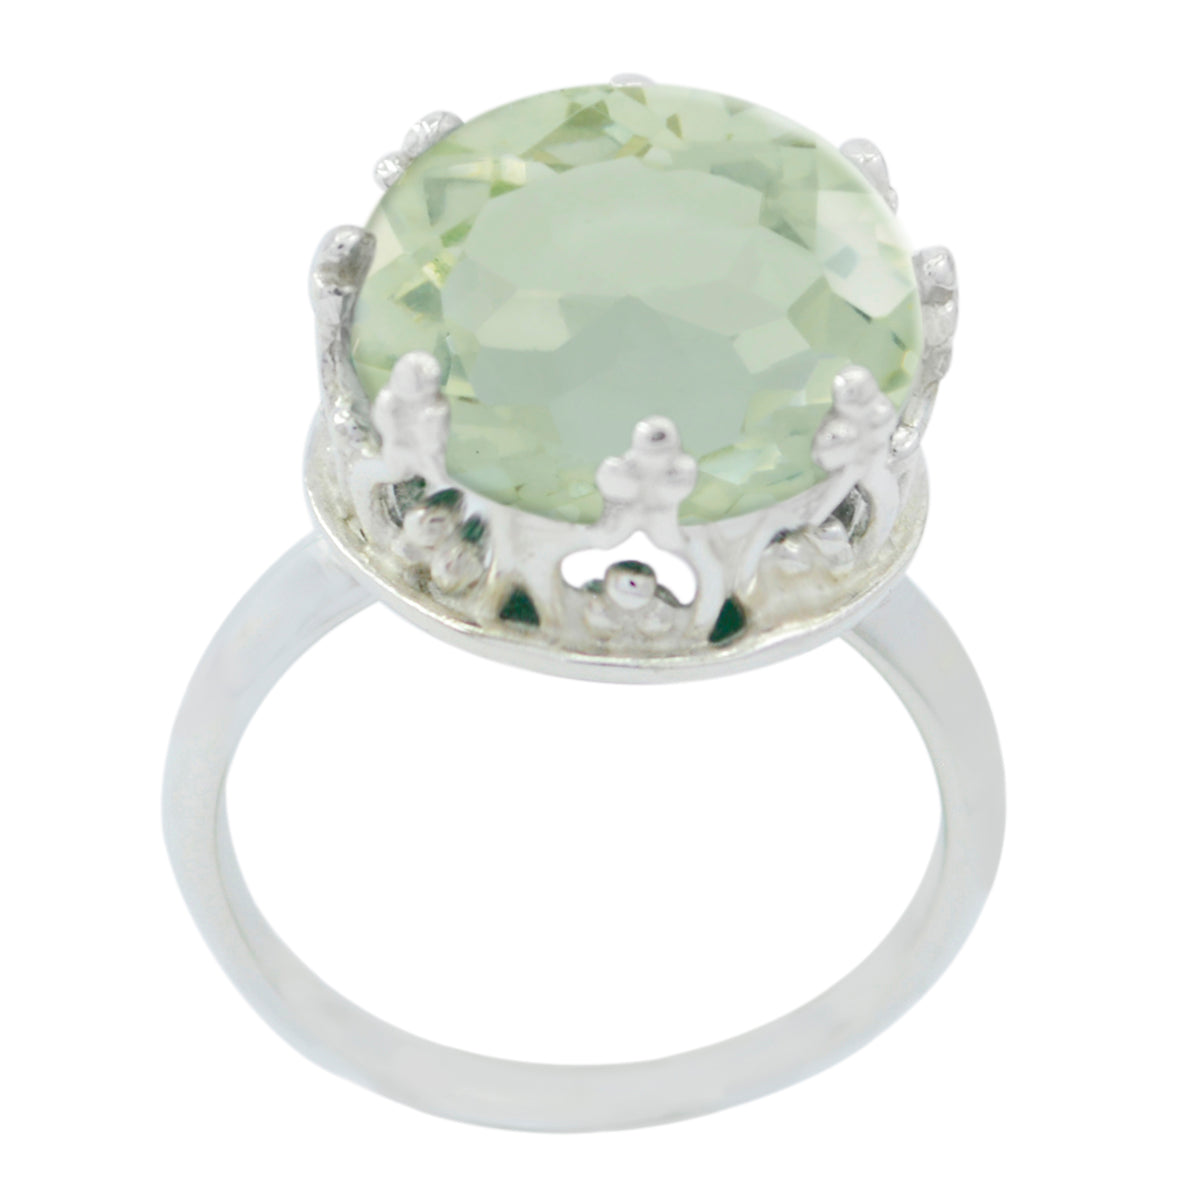 Taking Gemstone Green Amethyst Solid Silver Rings High End Jewelry